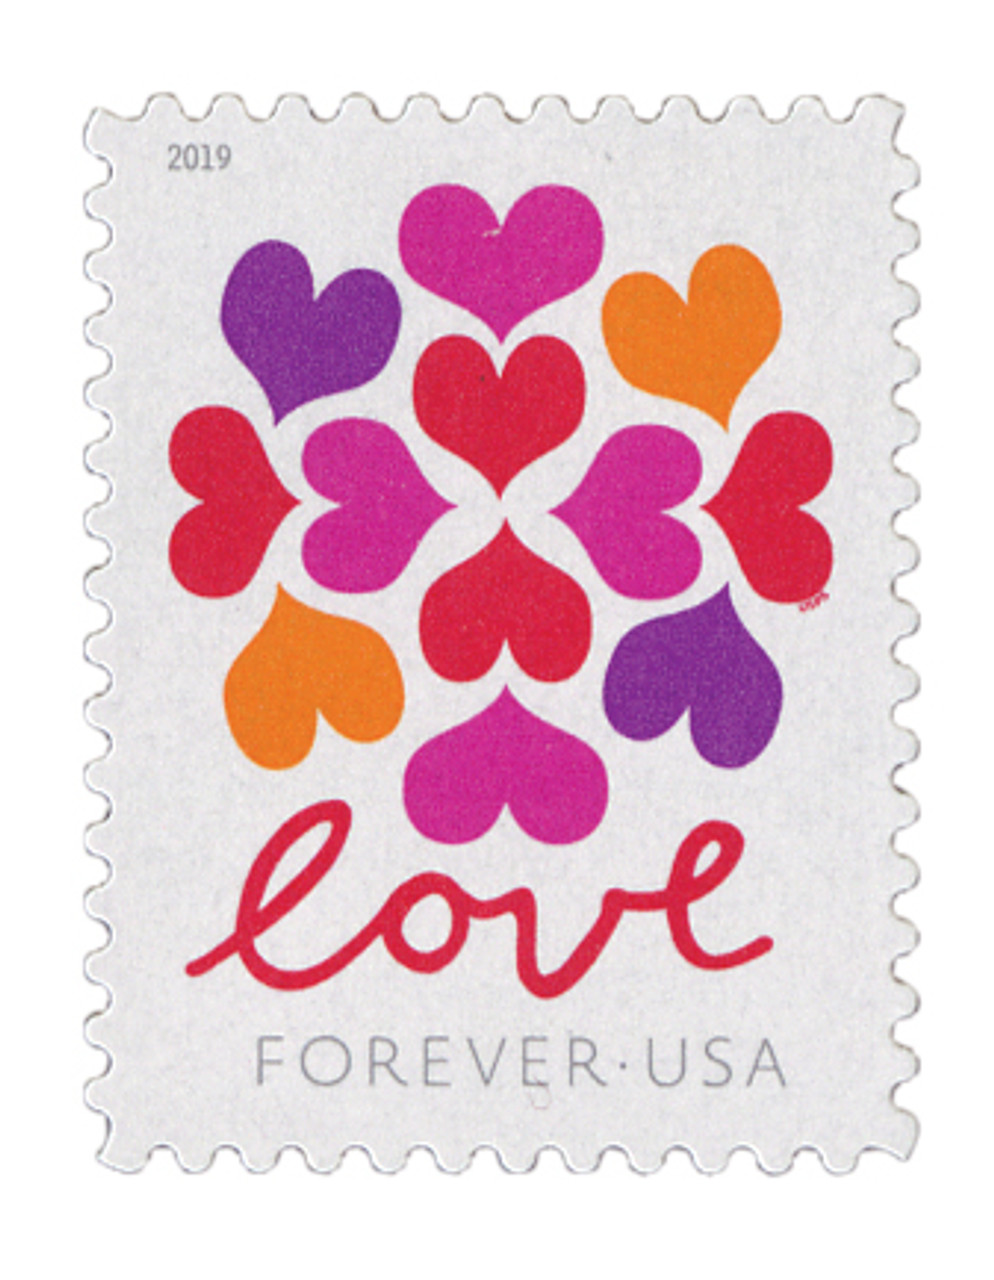 5342-45 - 2019 First-Class Forever Stamps - US Flag - set of 4 stamps -  Mystic Stamp Company